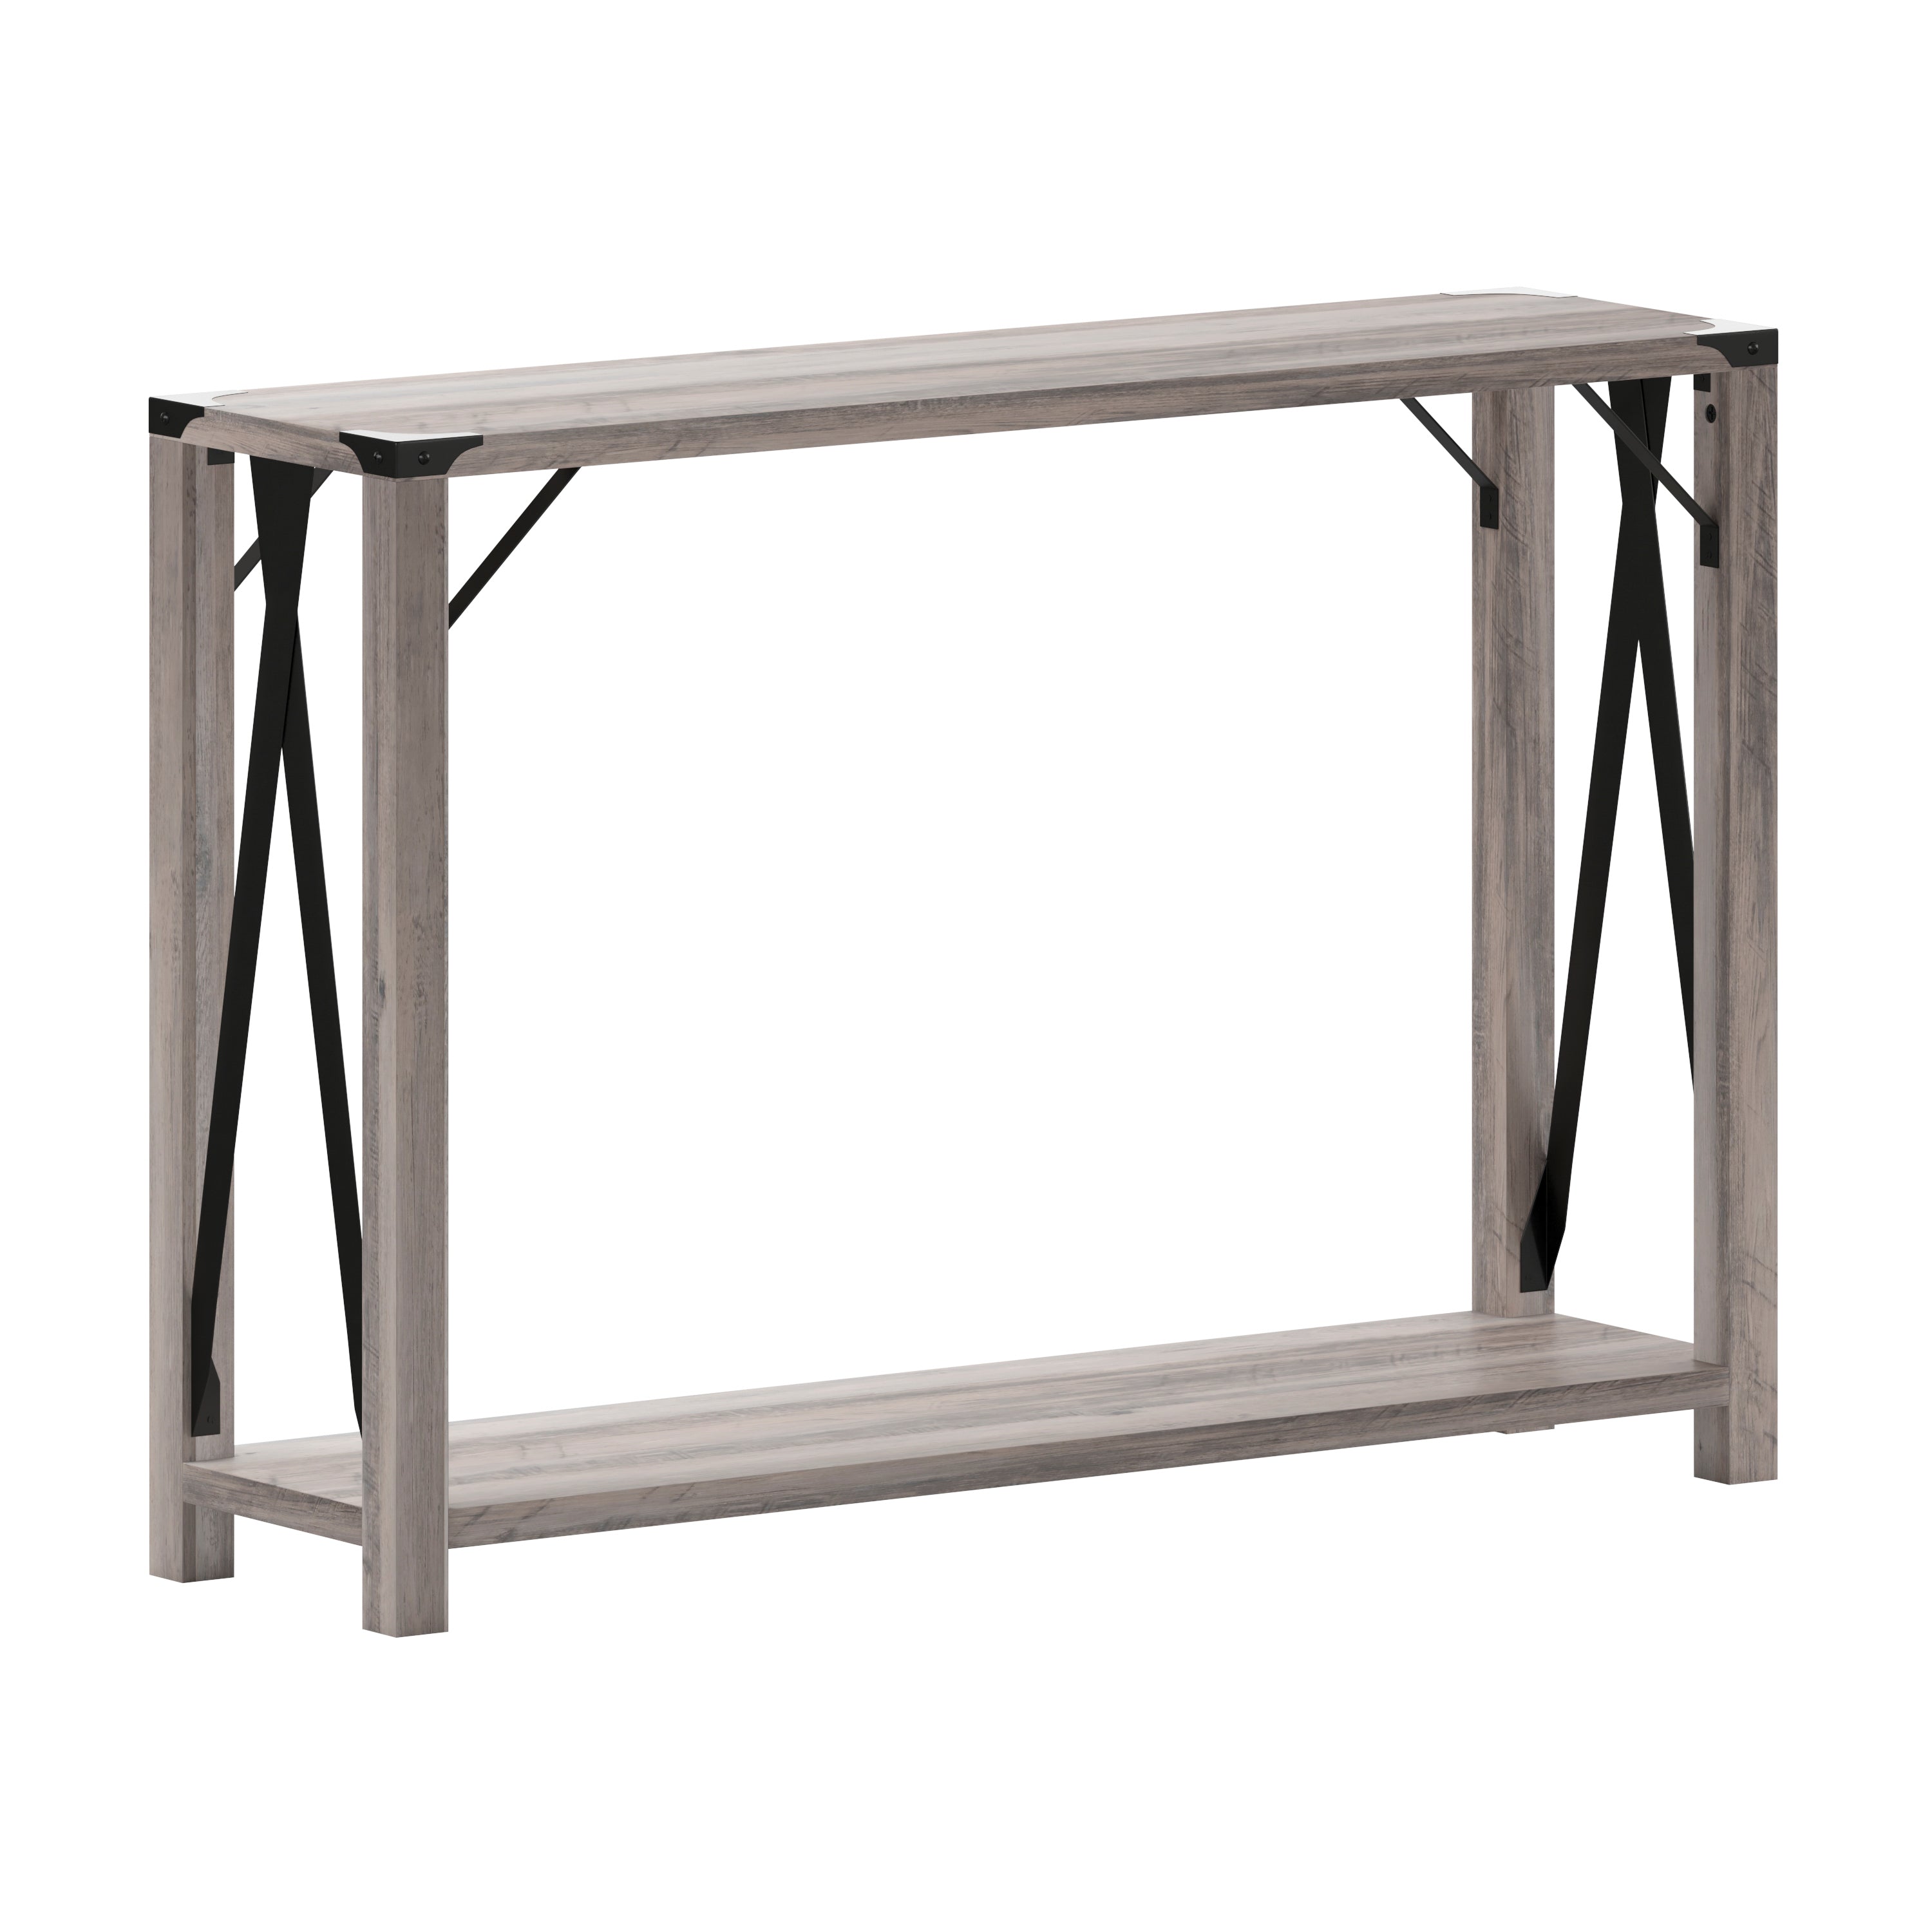 Wyatt Modern Farmhouse Wooden 2 Tier Console Entry Table with Metal Corner Accents and Cross Bracing-Console Table-Flash Furniture-Wall2Wall Furnishings